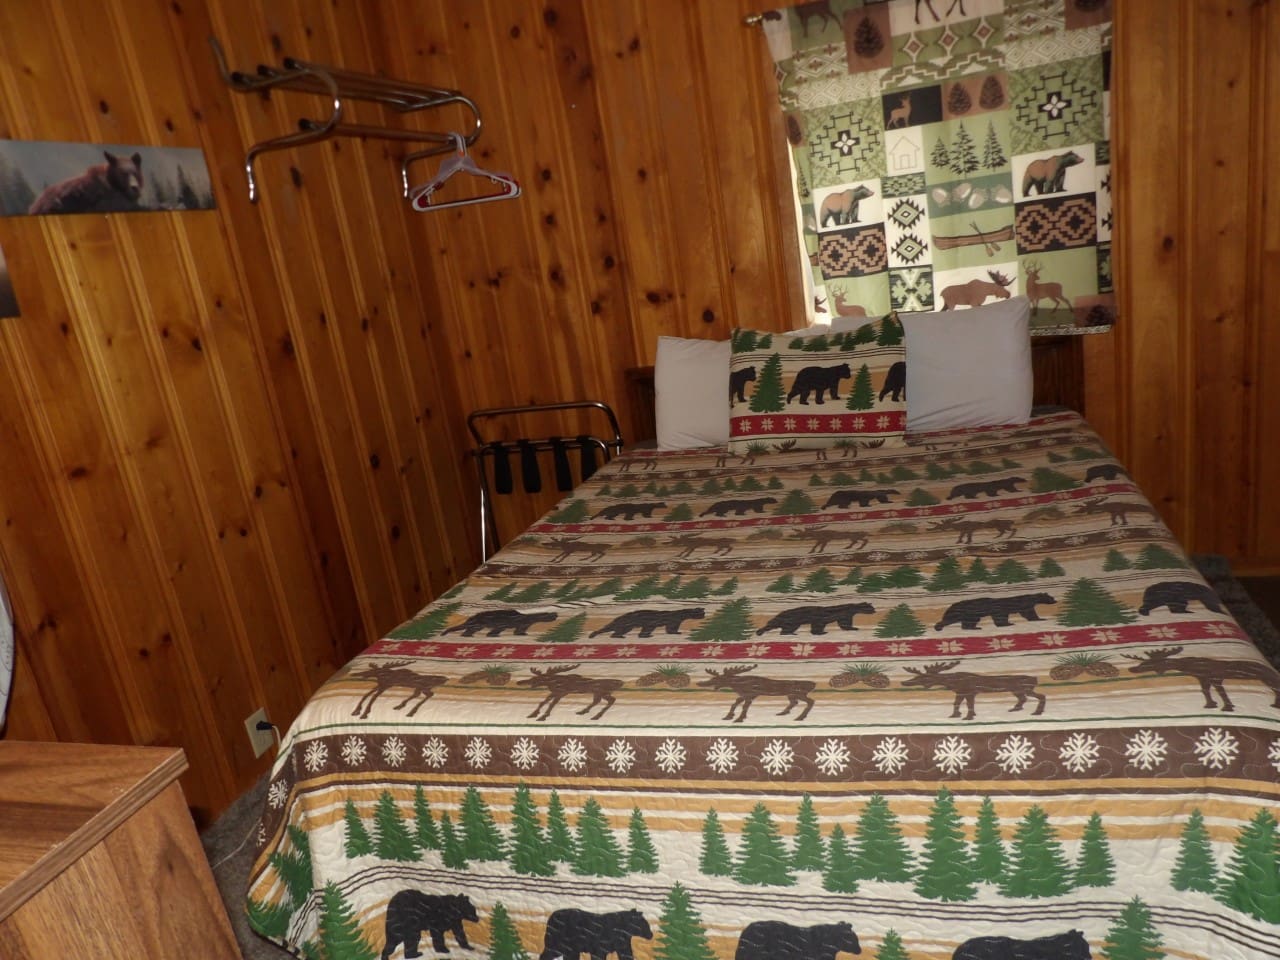 A bed with a bear print blanket on it